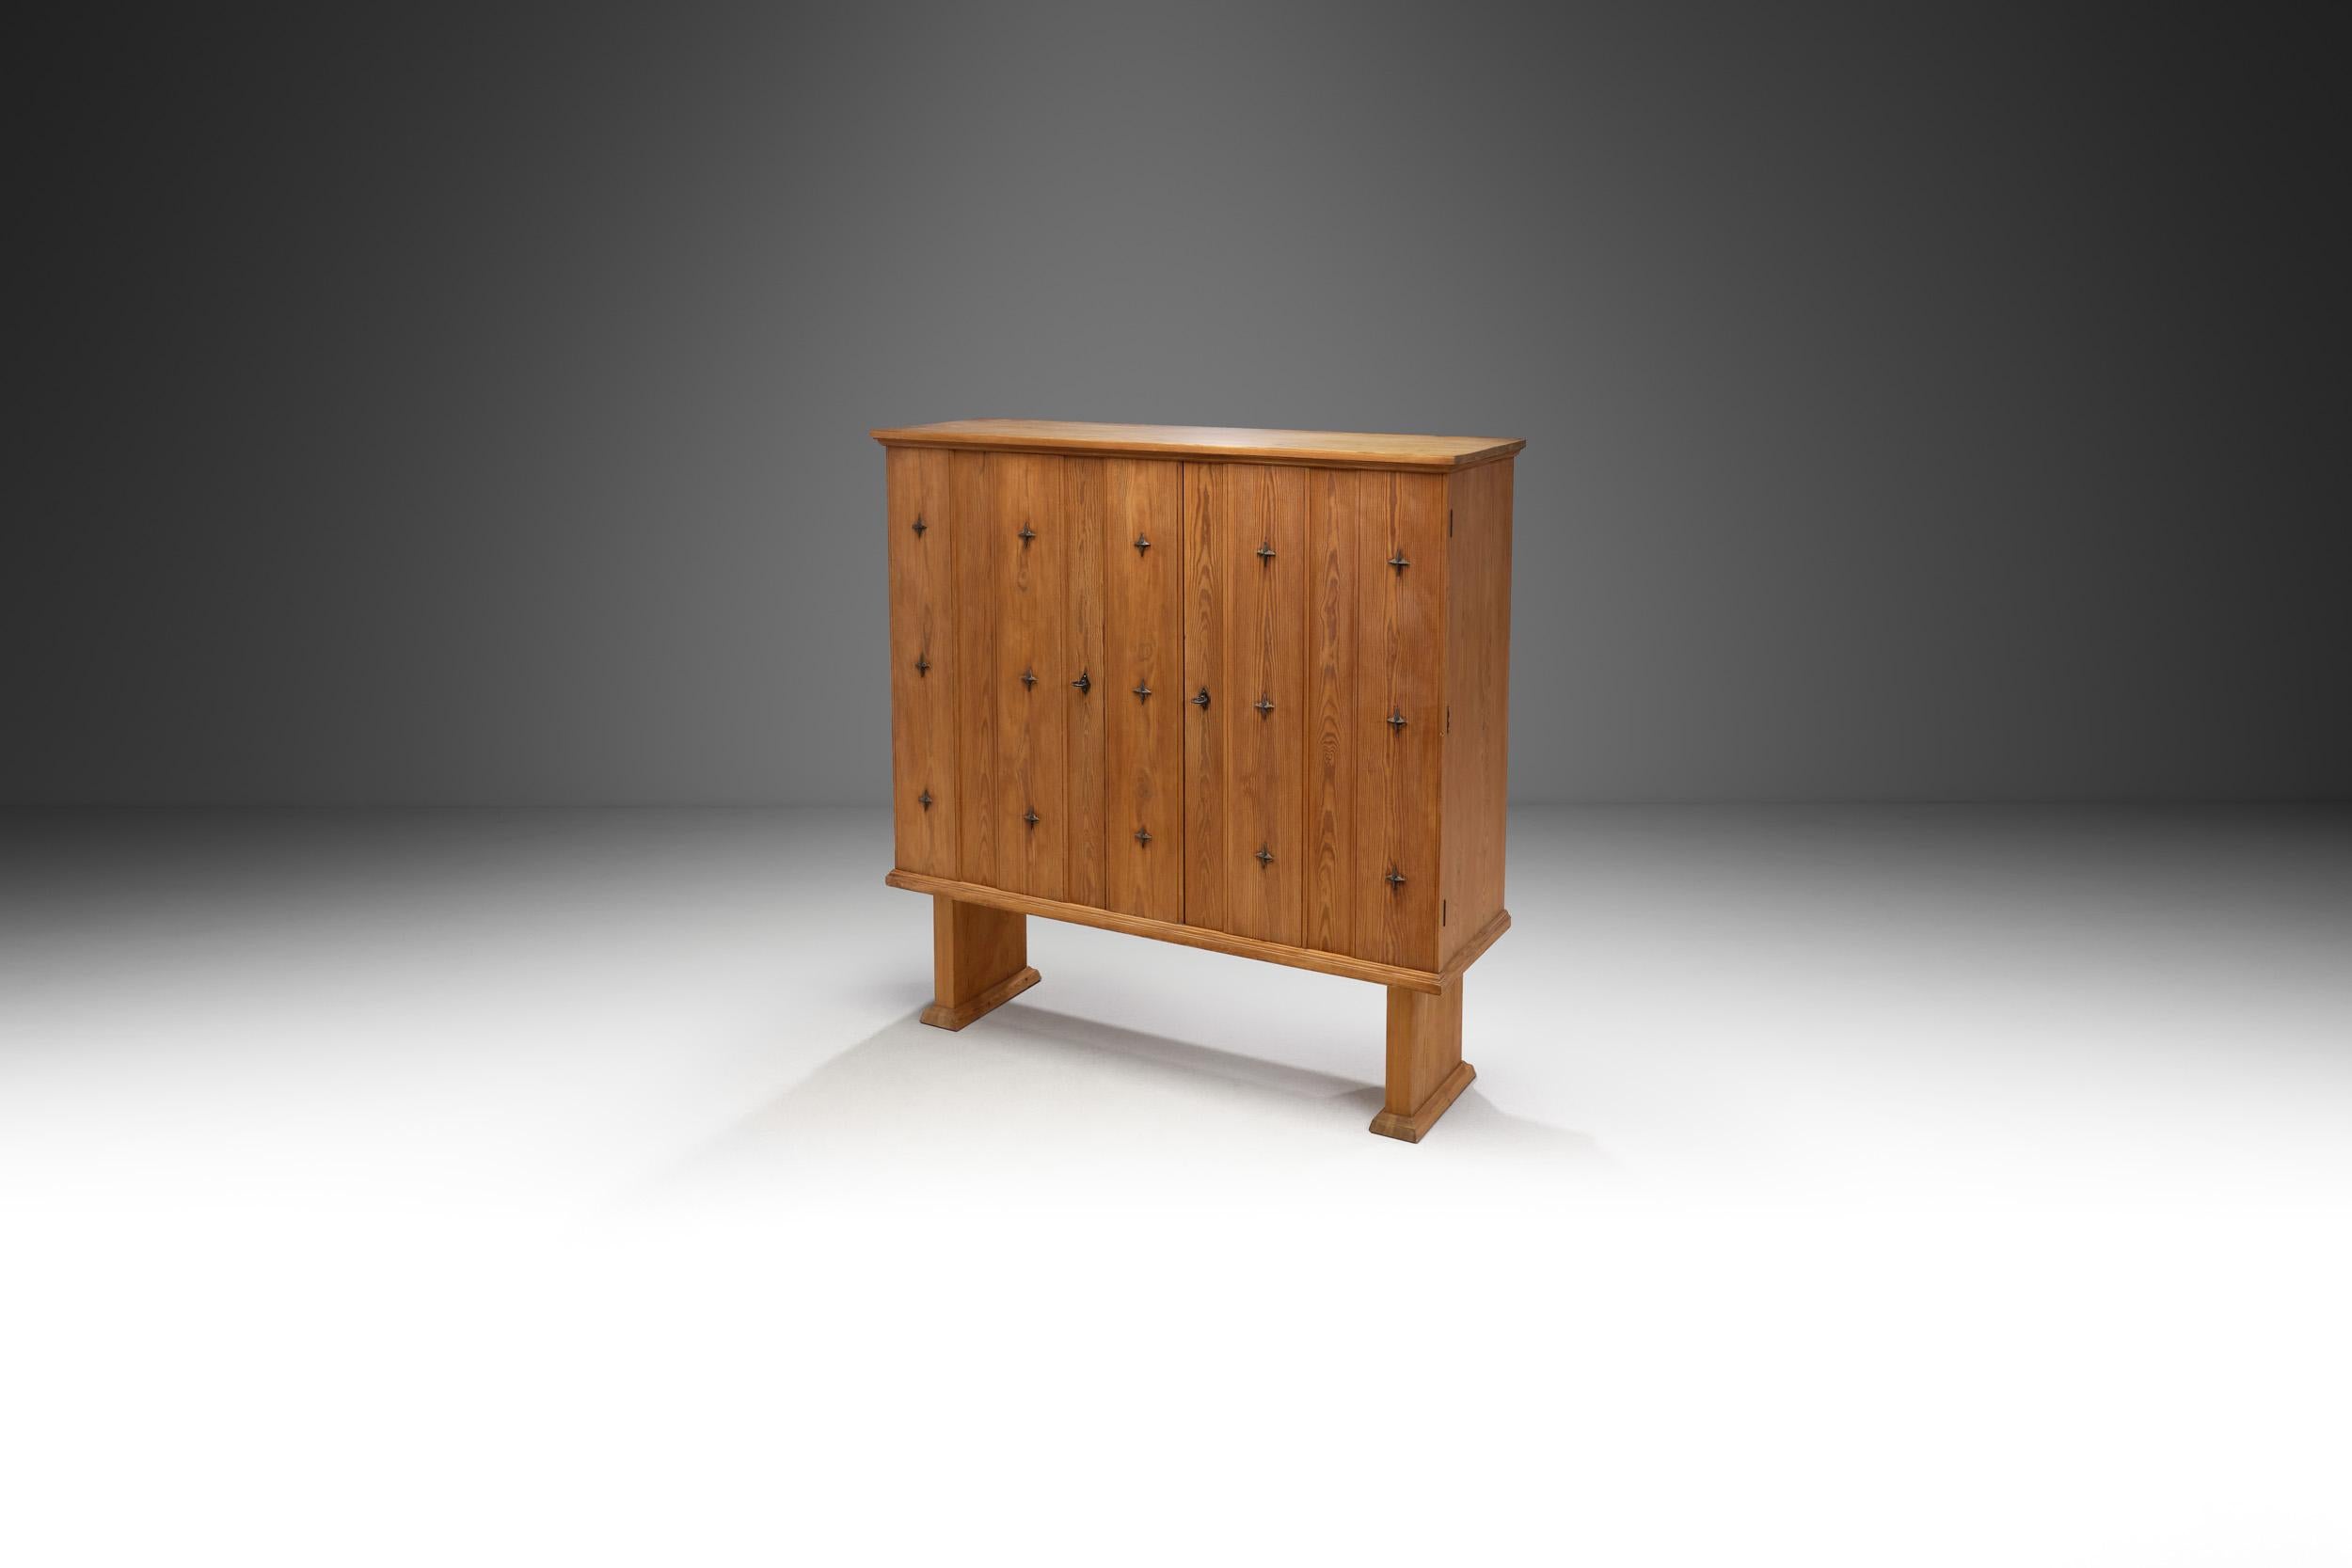 Made of pinewood, this cabinet is strong and robust, producing a unique and impressive take on Modernism. This cabinet melds seamlessly with any style thanks to its natural elegance. The pine form is elemental, enhanced by the metal decorative